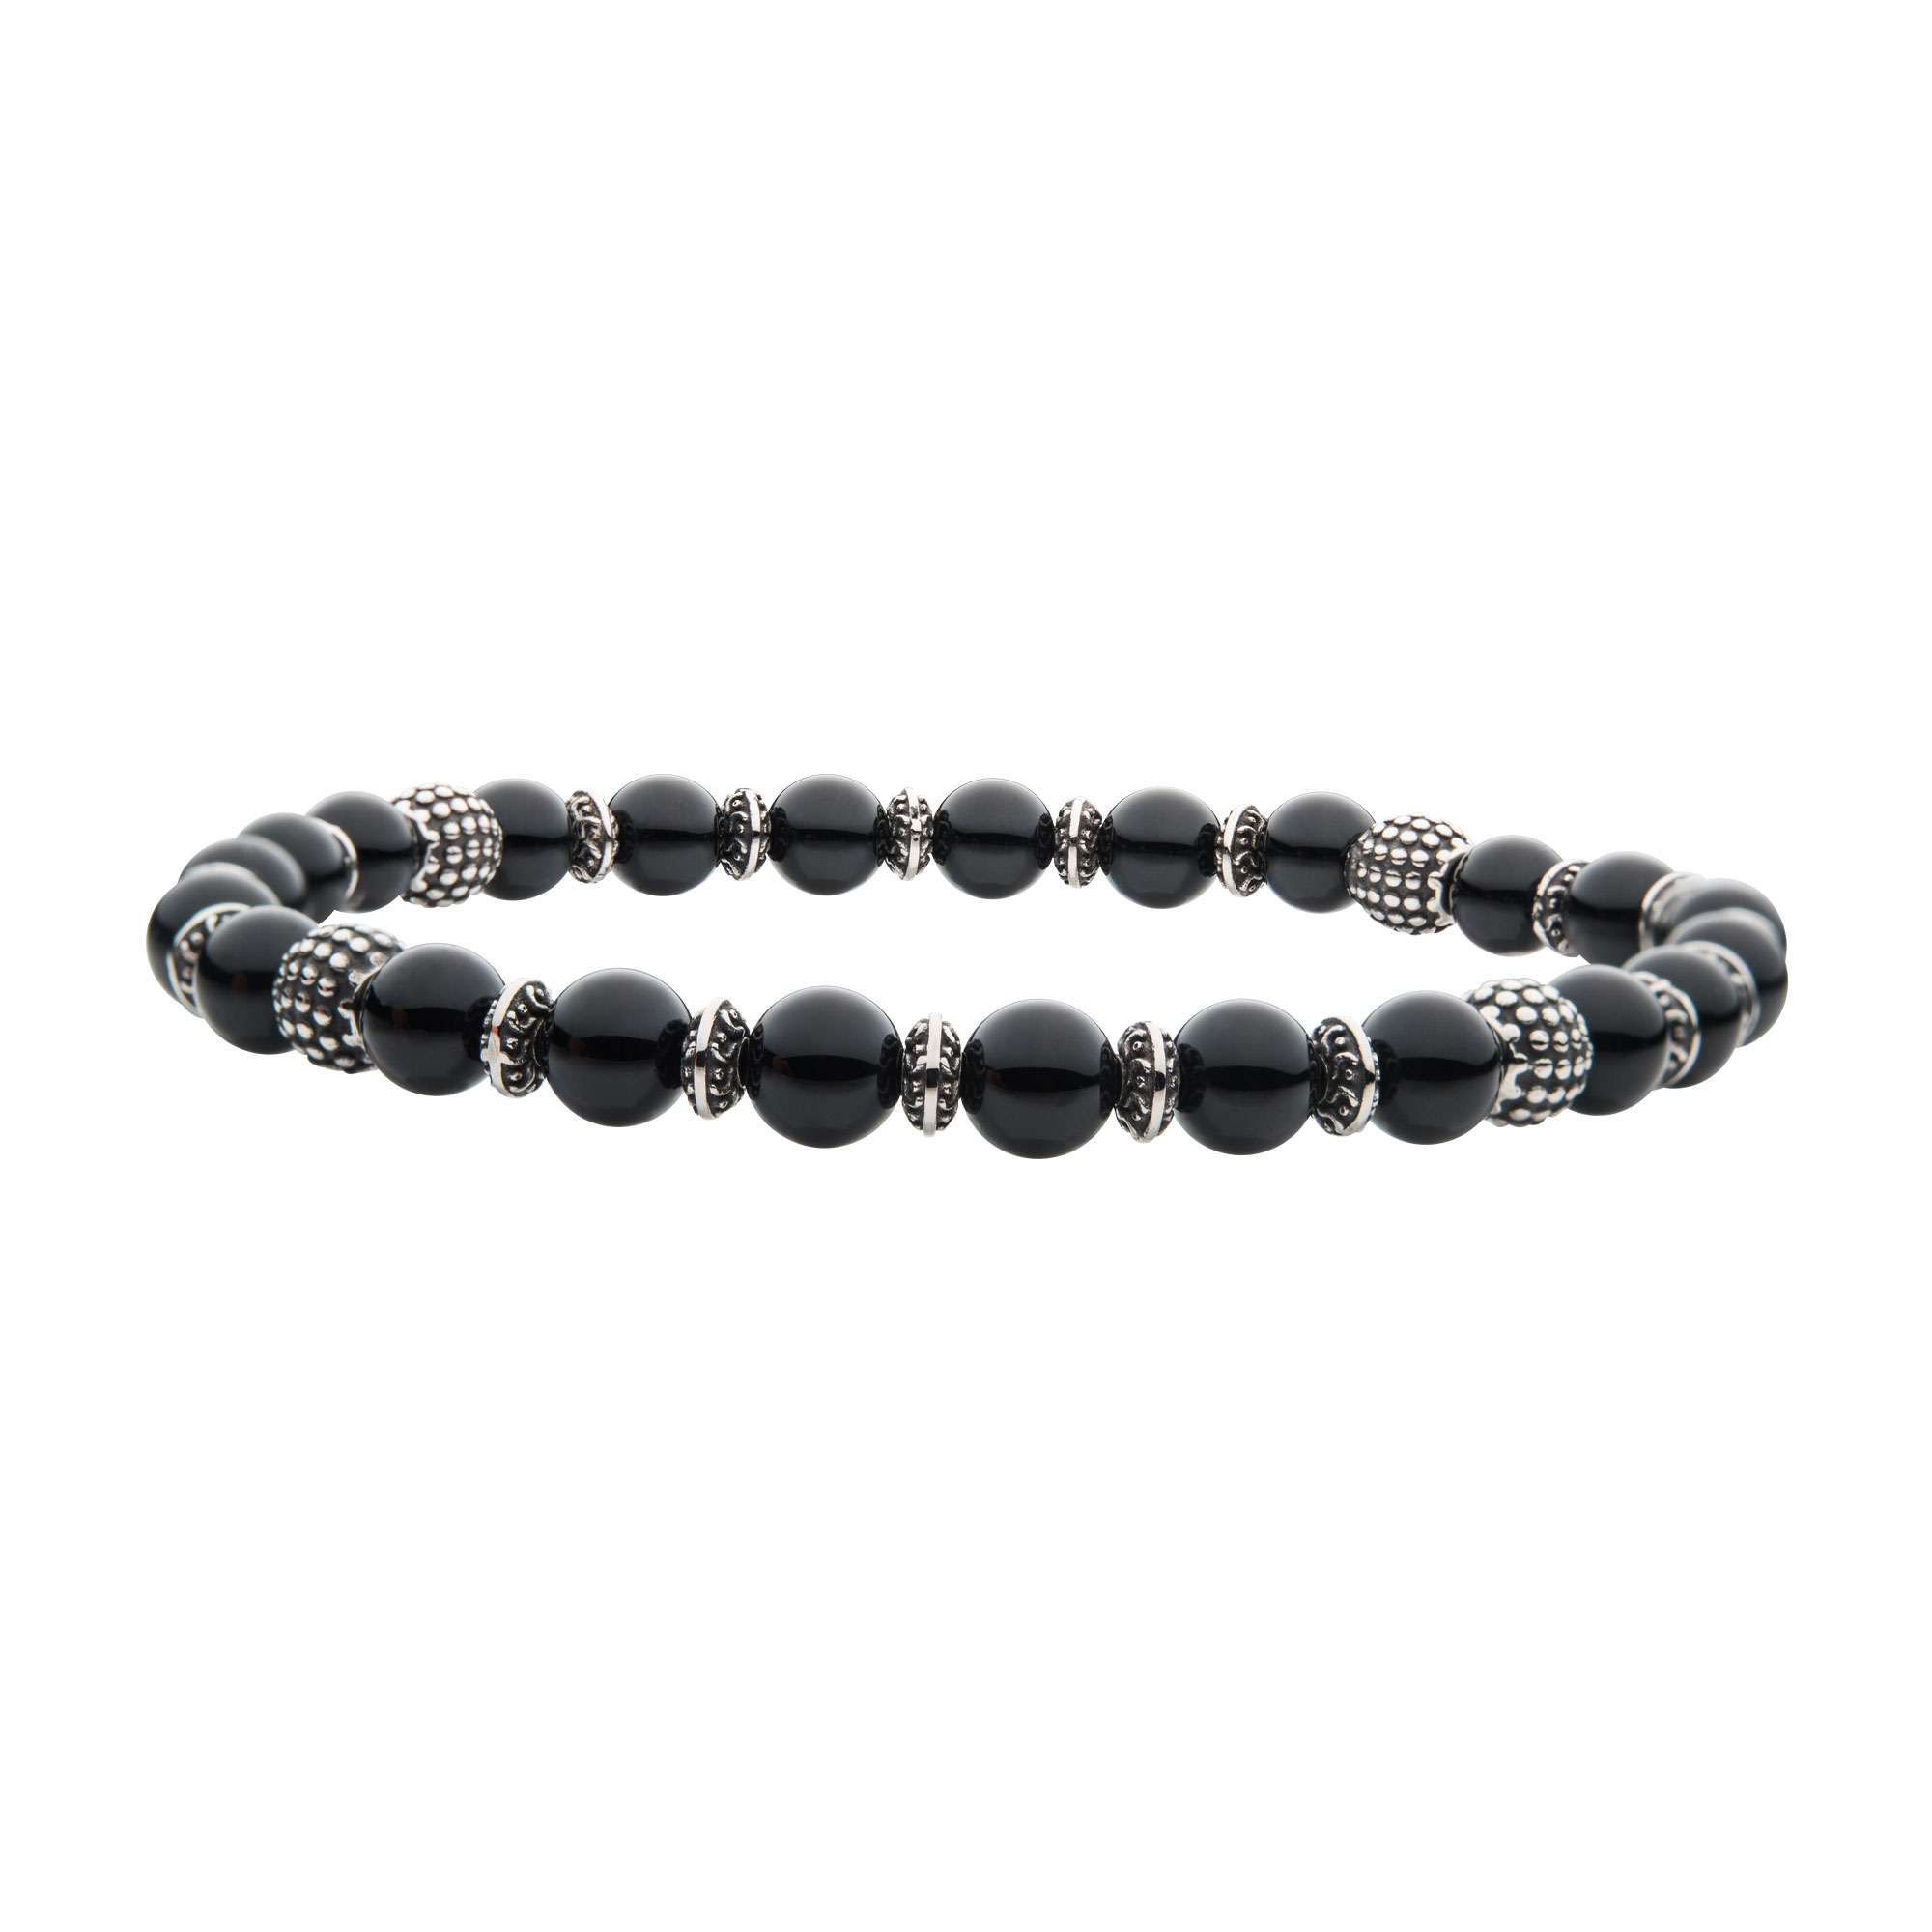 Black Agate Stones with Black Oxidized Beads Bracelet Mueller Jewelers Chisago City, MN